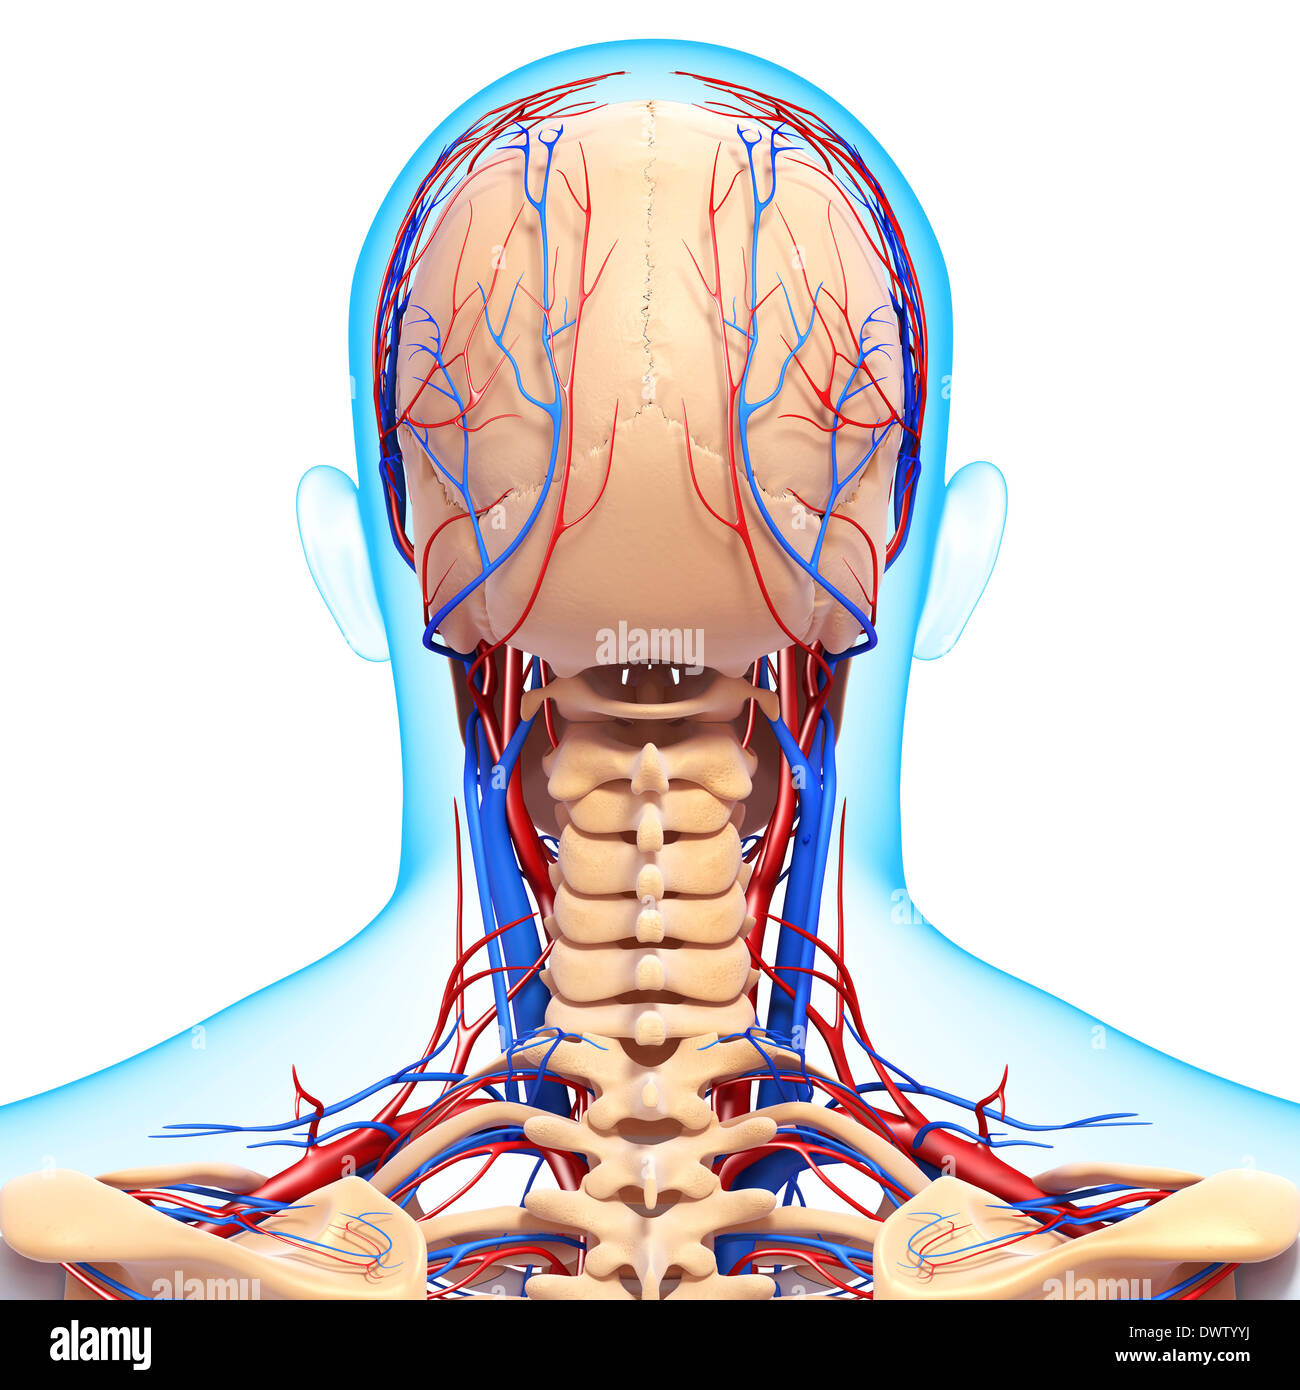 Blood circulation nape of the neck drawing Stock Photo